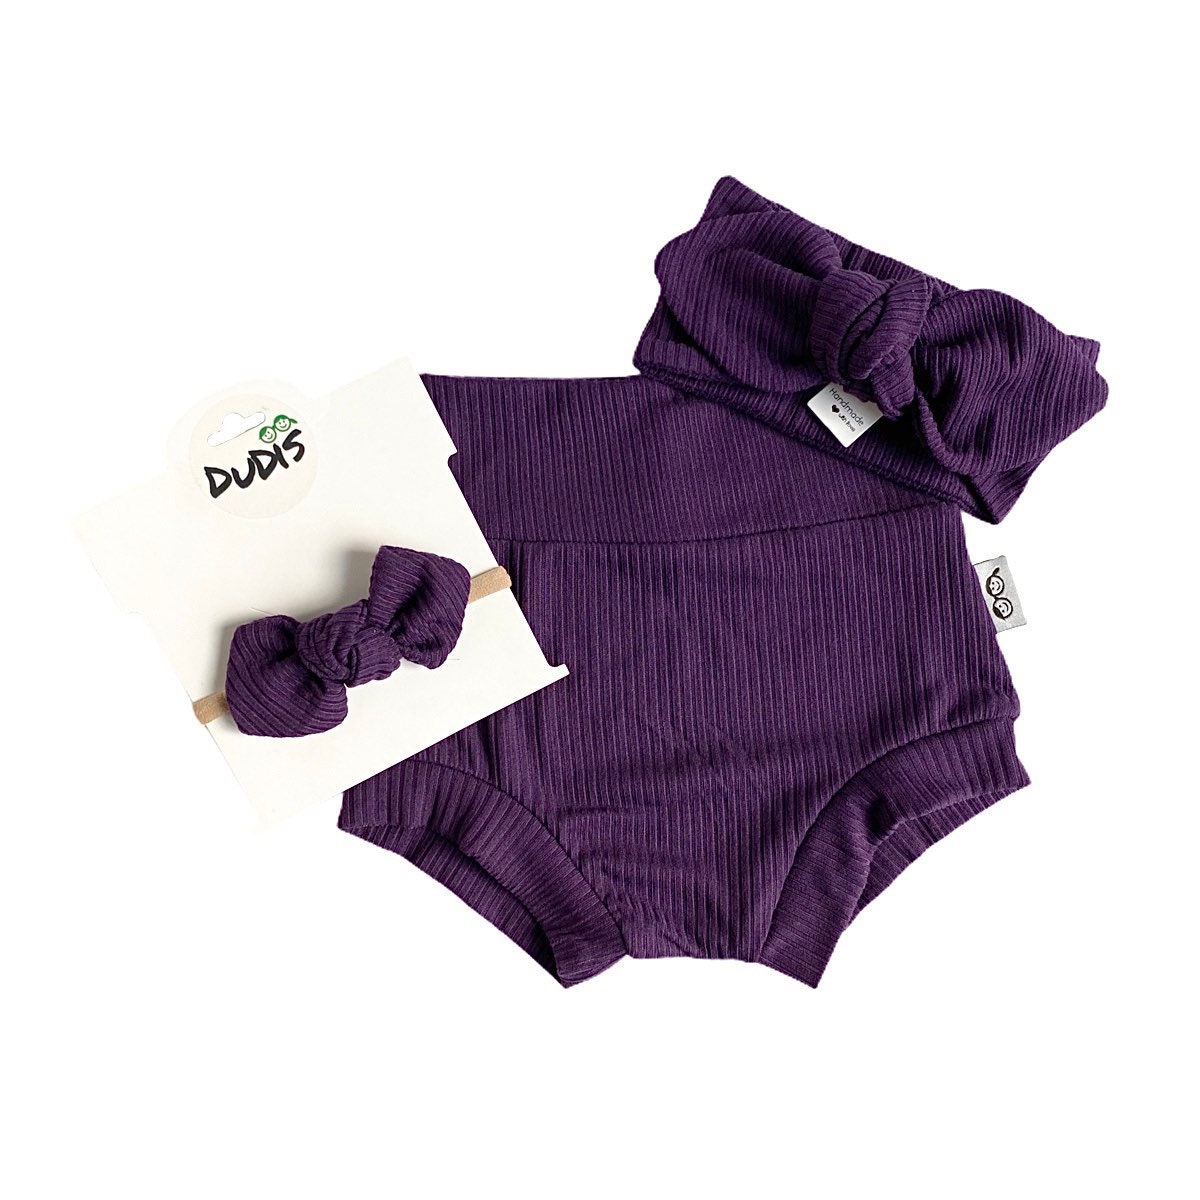  Kids Unisex Toddlers and Babies' Cotton Pull On Shorts  Breathable Cotton Baby Boys' Girls' Newborn (Purple, 4-5 Years) : Clothing,  Shoes & Jewelry